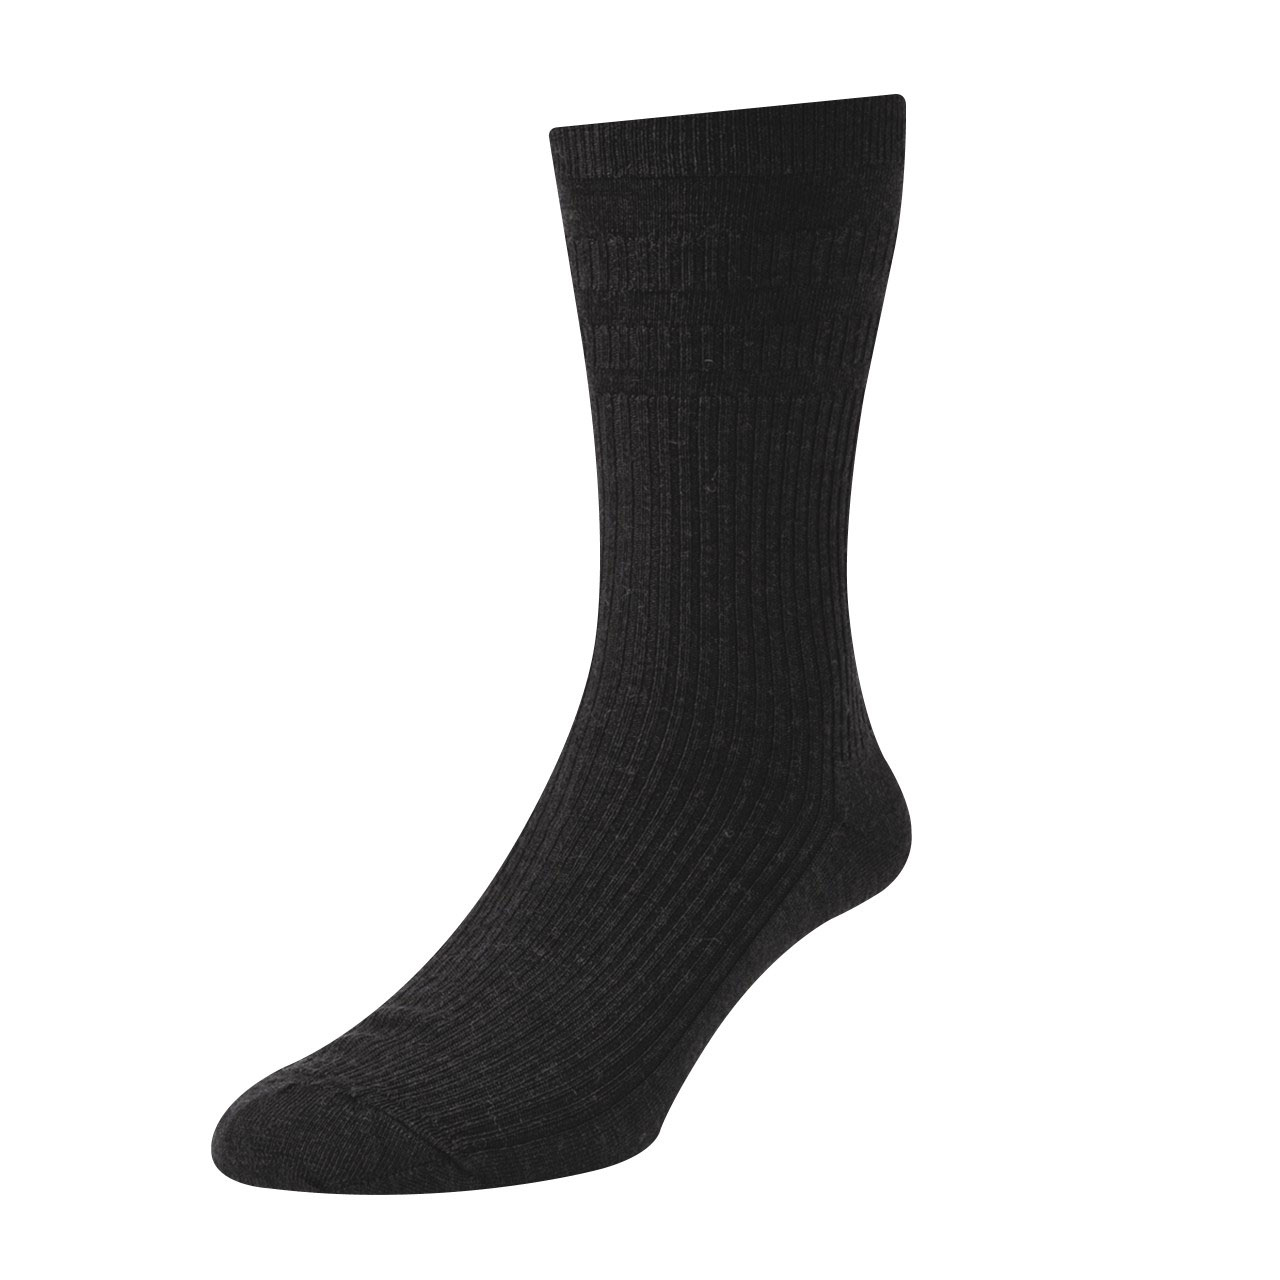 Extra-Wide Softop Socks - Wool Rich - Pack of 3